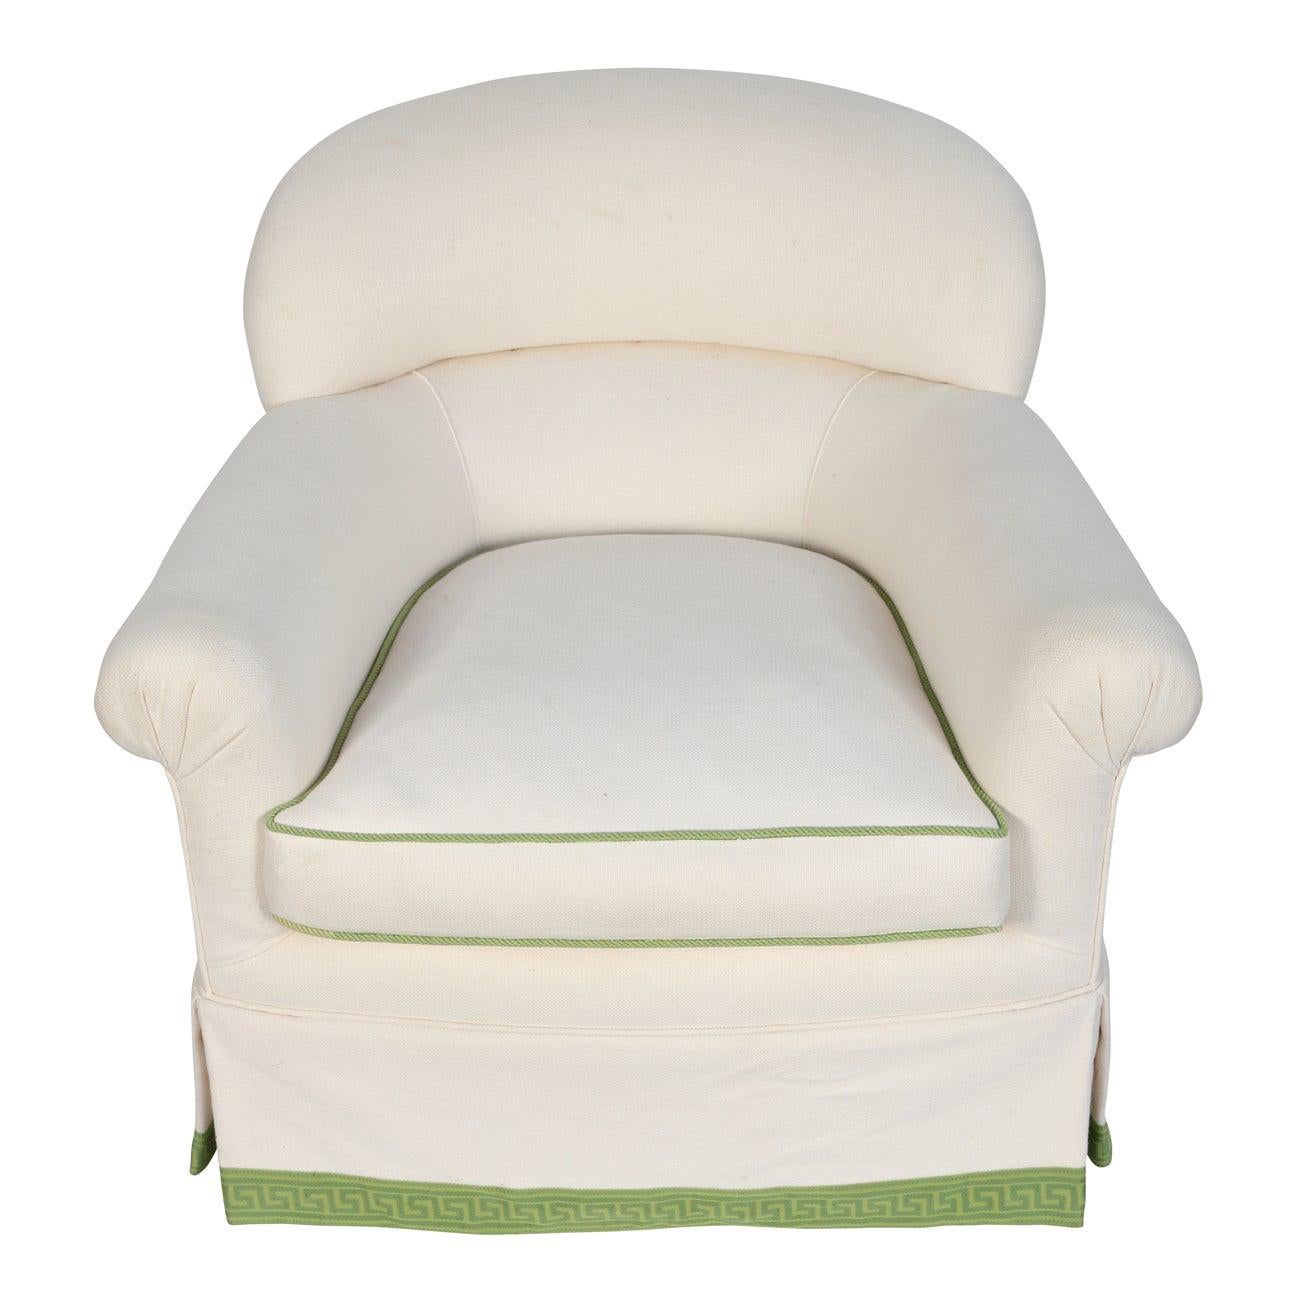 Syrie Maugham Upholstered Arm Chair Newly Upholstered in White Linen with Green